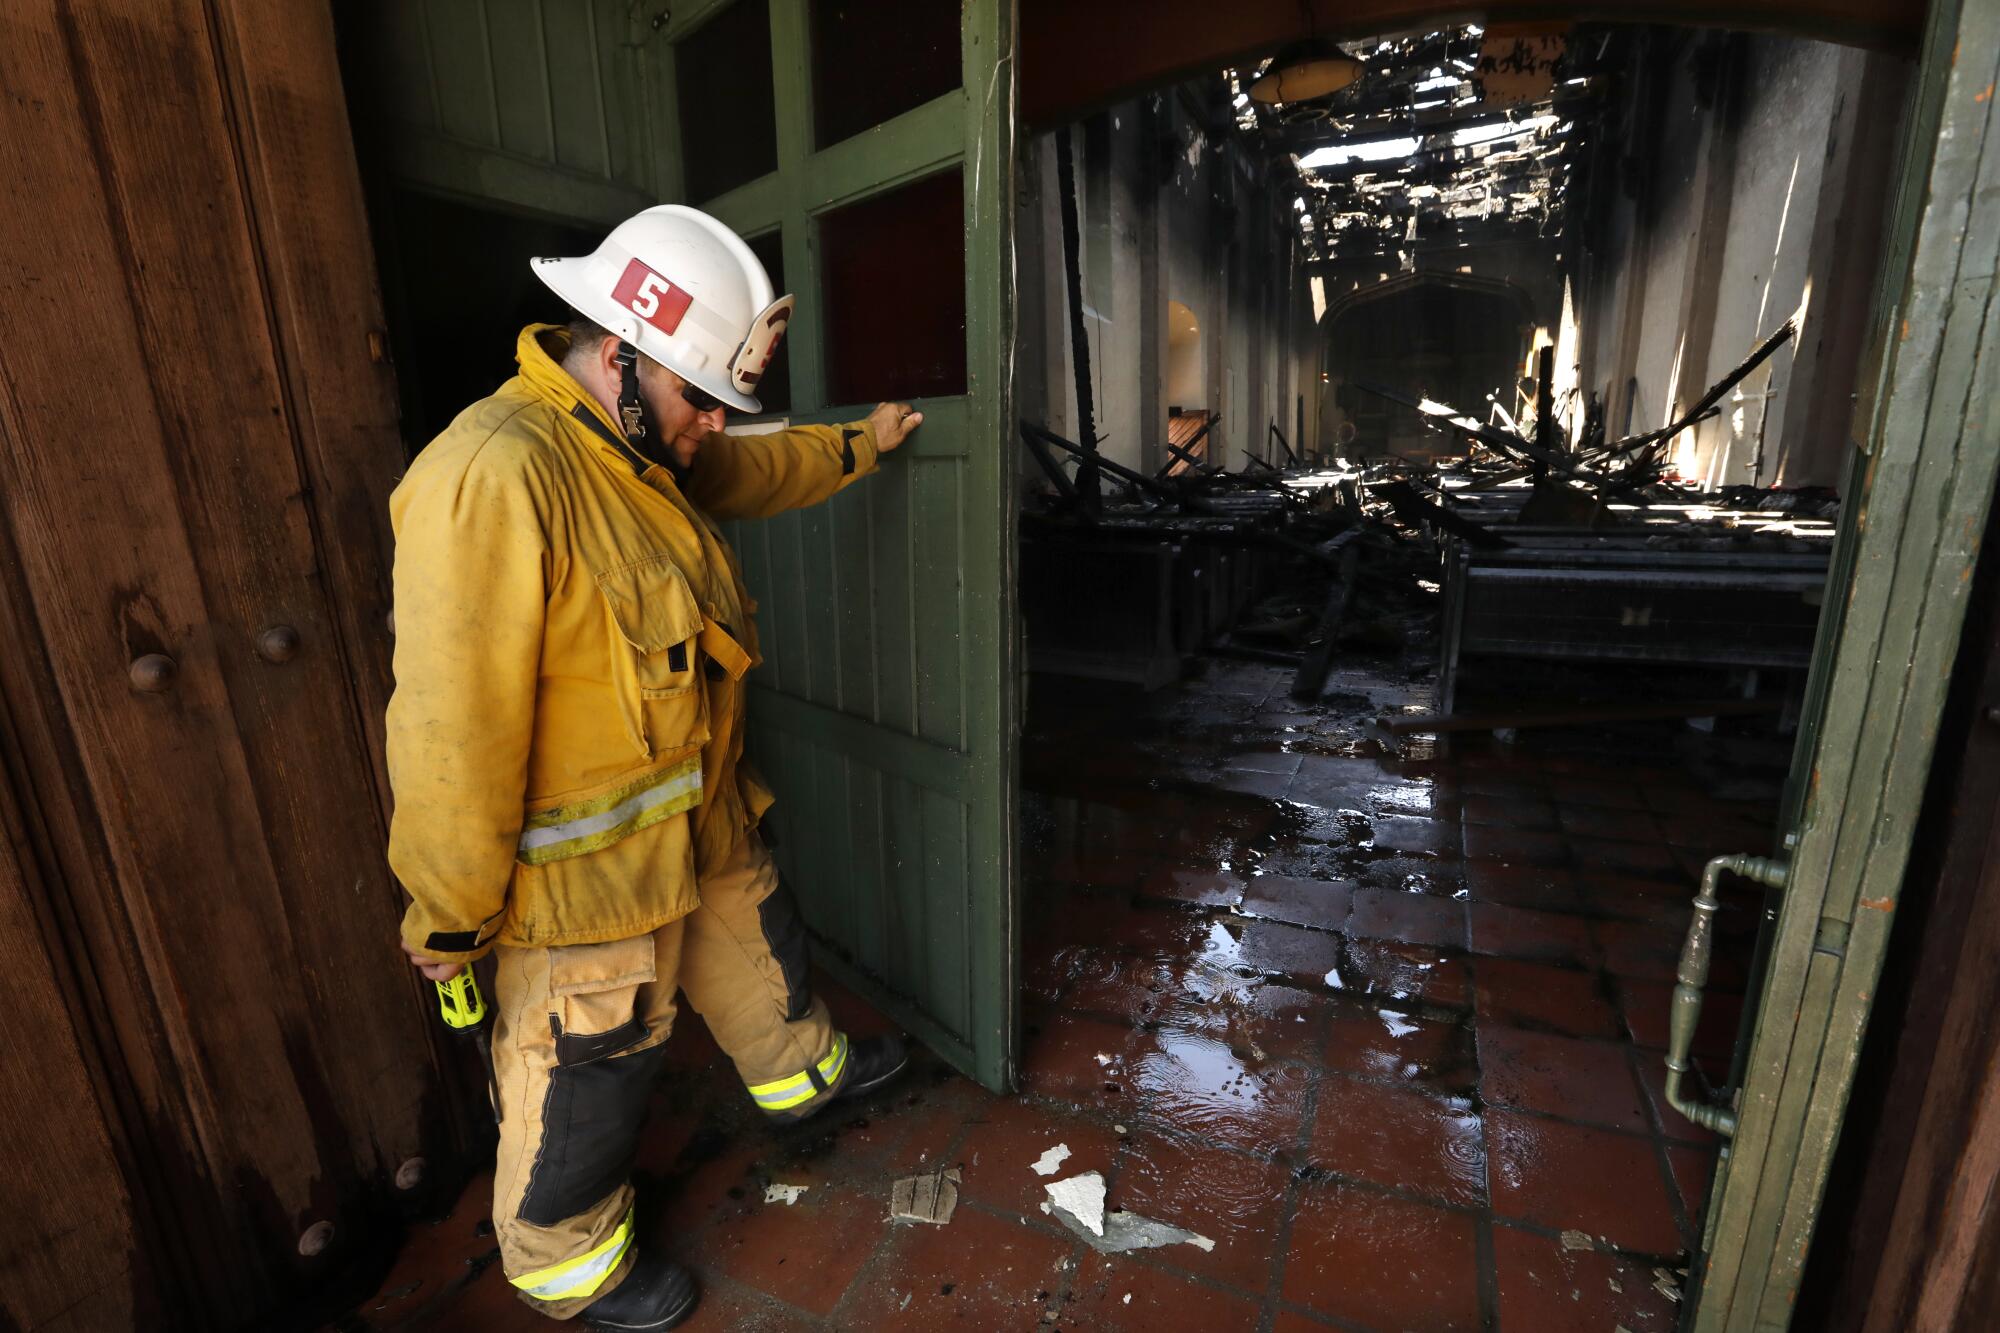 San Gabriel Fire Captain David Mulligan opens a door to the burned and severely damaged interior of the San Gabriel Mission